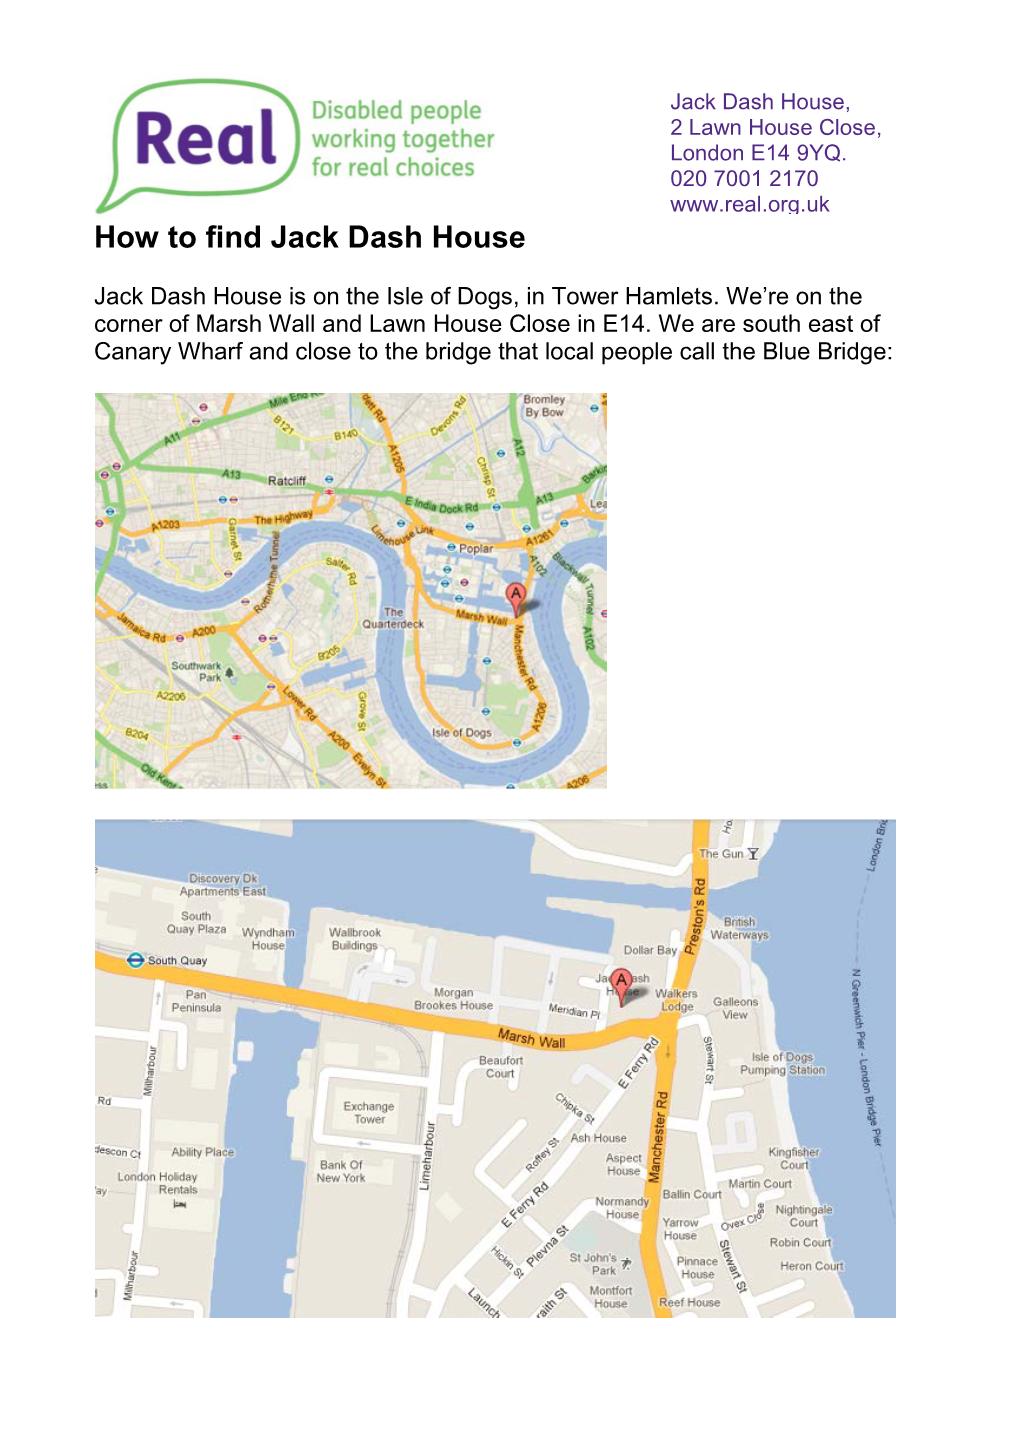 How to Find Jack Dash House